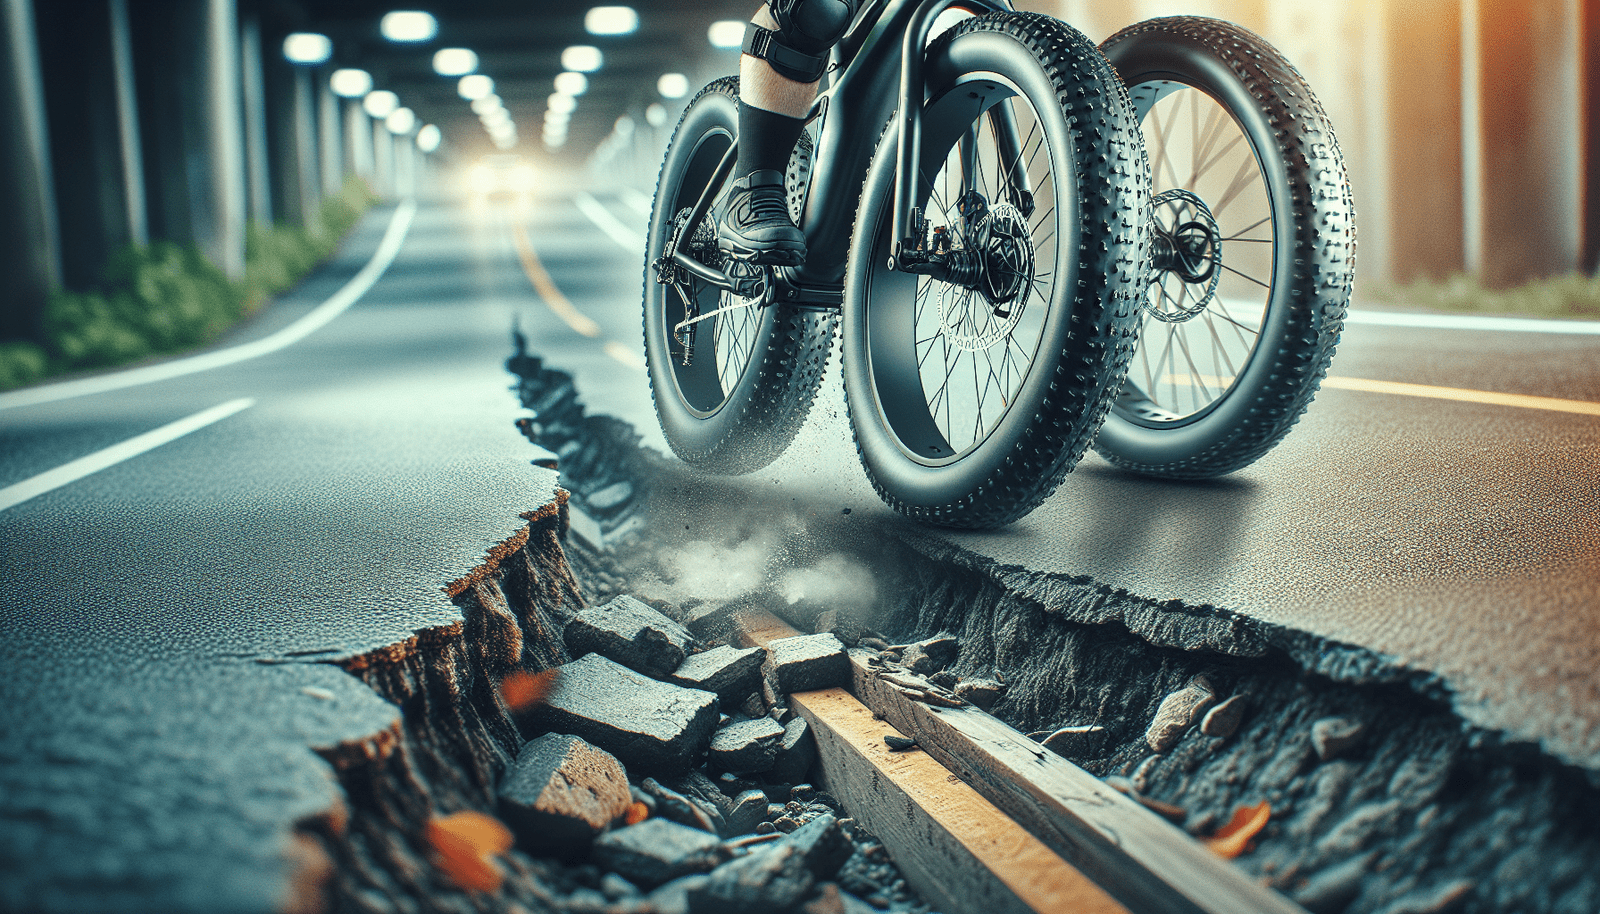 How Do Electric Bikes Handle Rough Roads And Potholes?